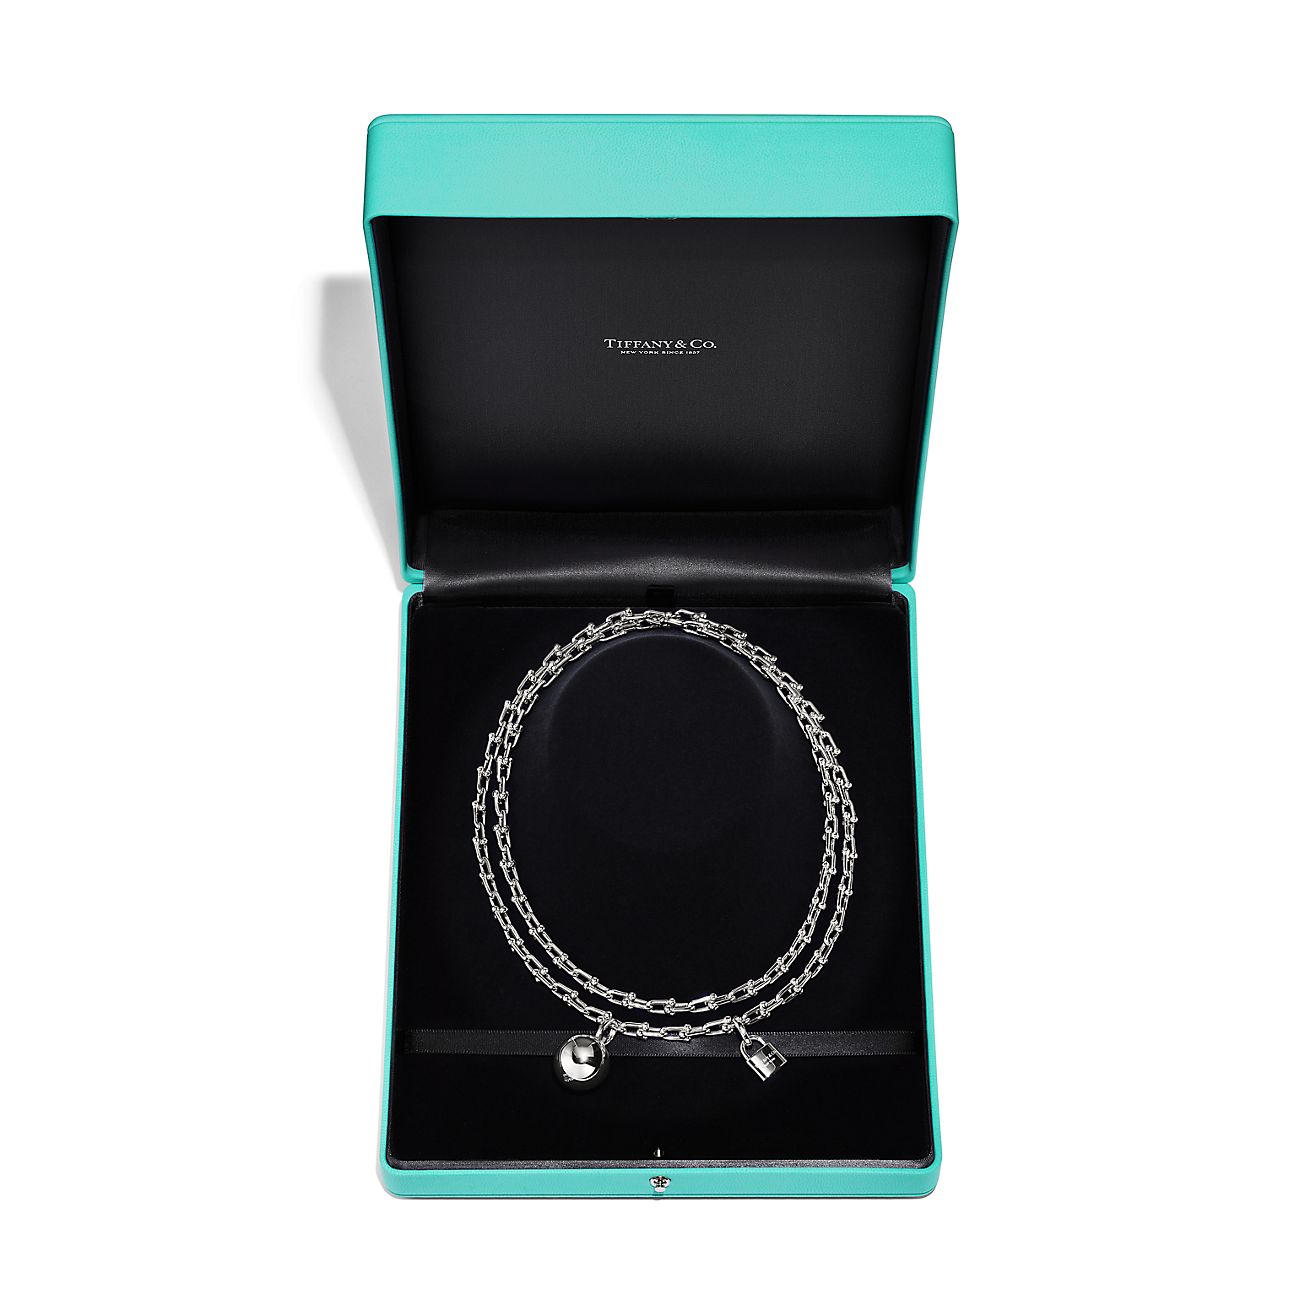 Return to Tiffany® Wrap Necklace in Silver with Pearls and a Diamond, Small